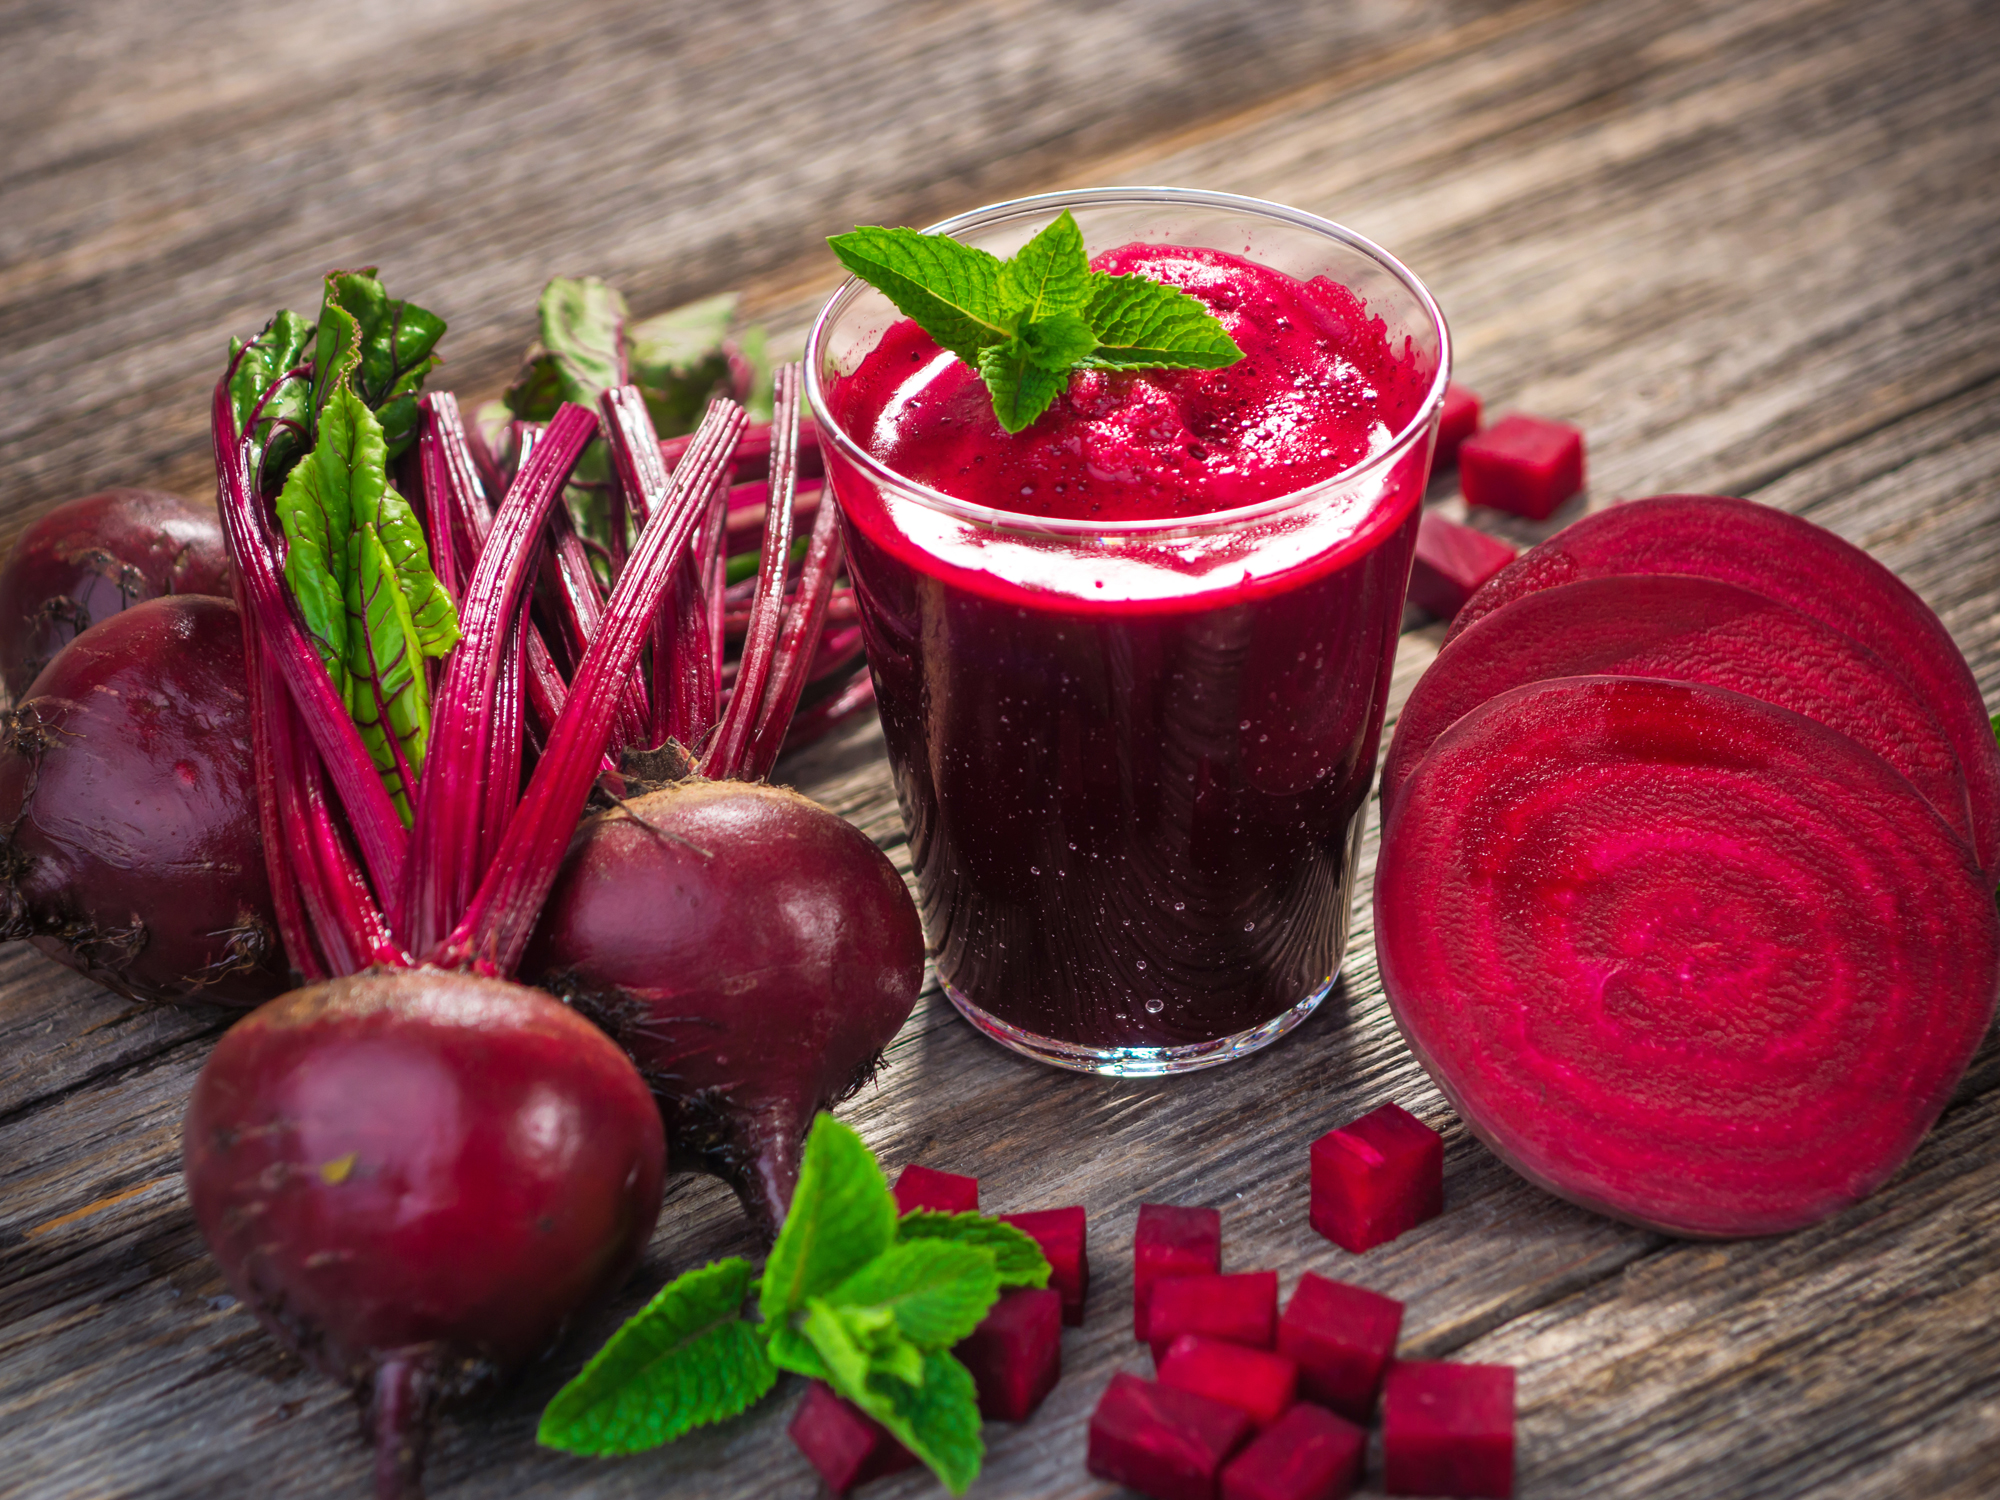 Beet benefits: A must-have for healthy living and disease prevention